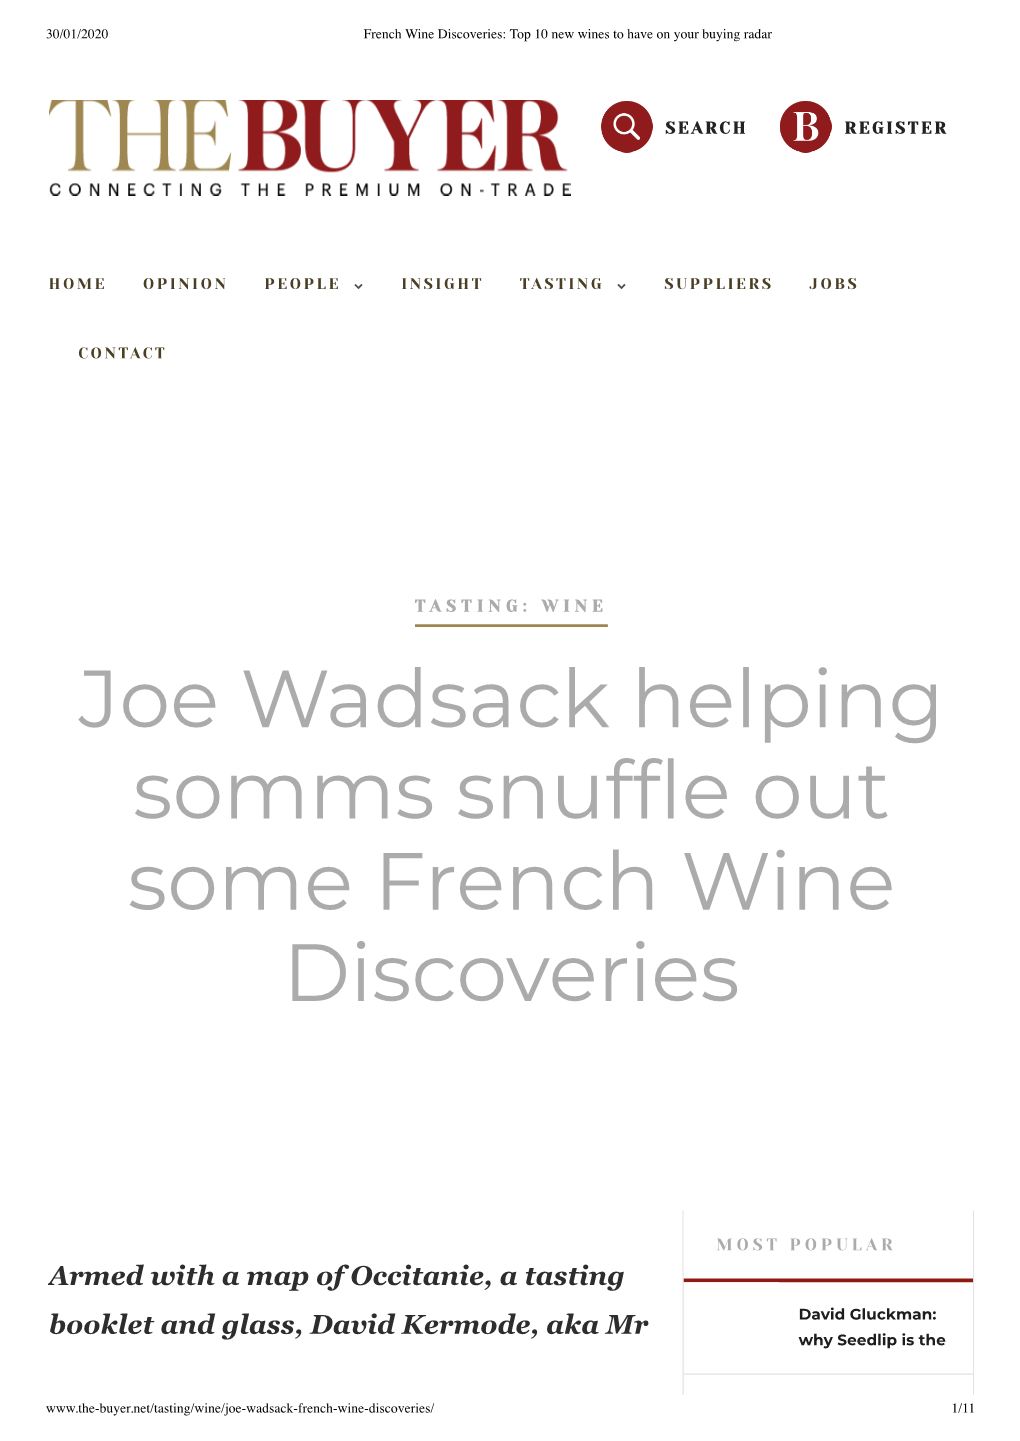 Joe Wadsack Helping Somms Snuf E out Some French Wine Discoveries